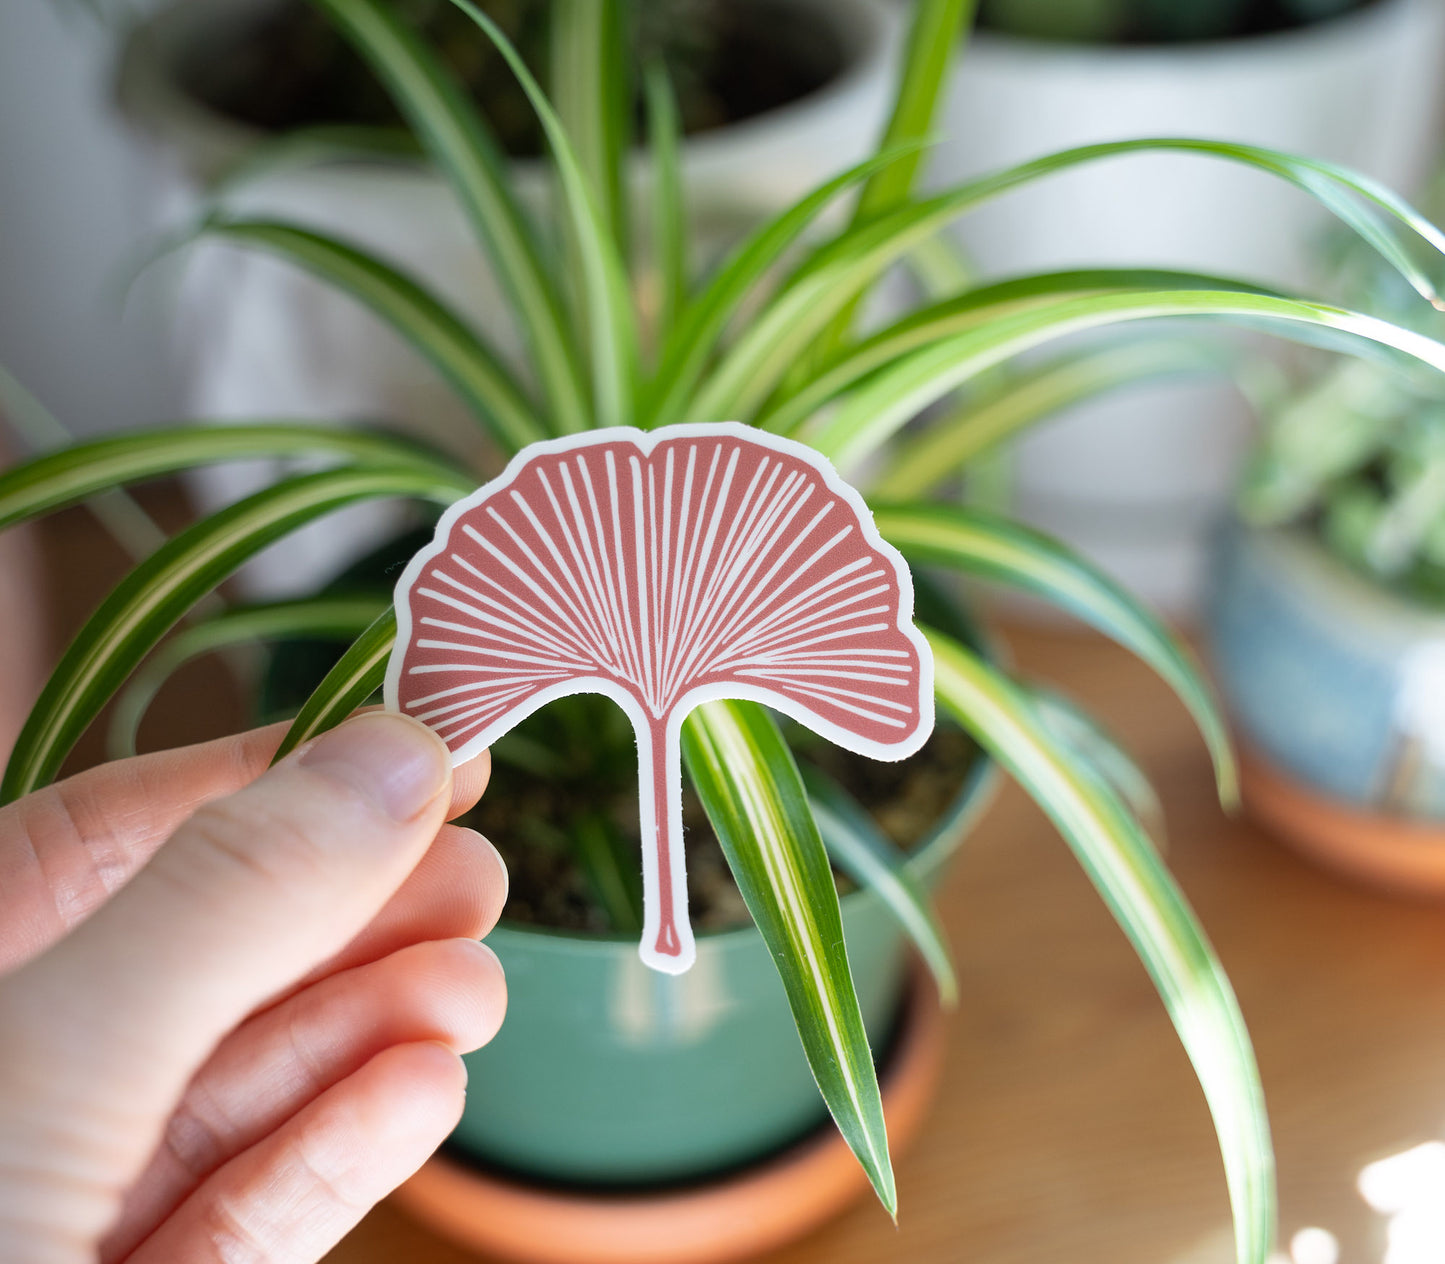 Hand holding a pink ginkgo leaf sticker in front of a house plant